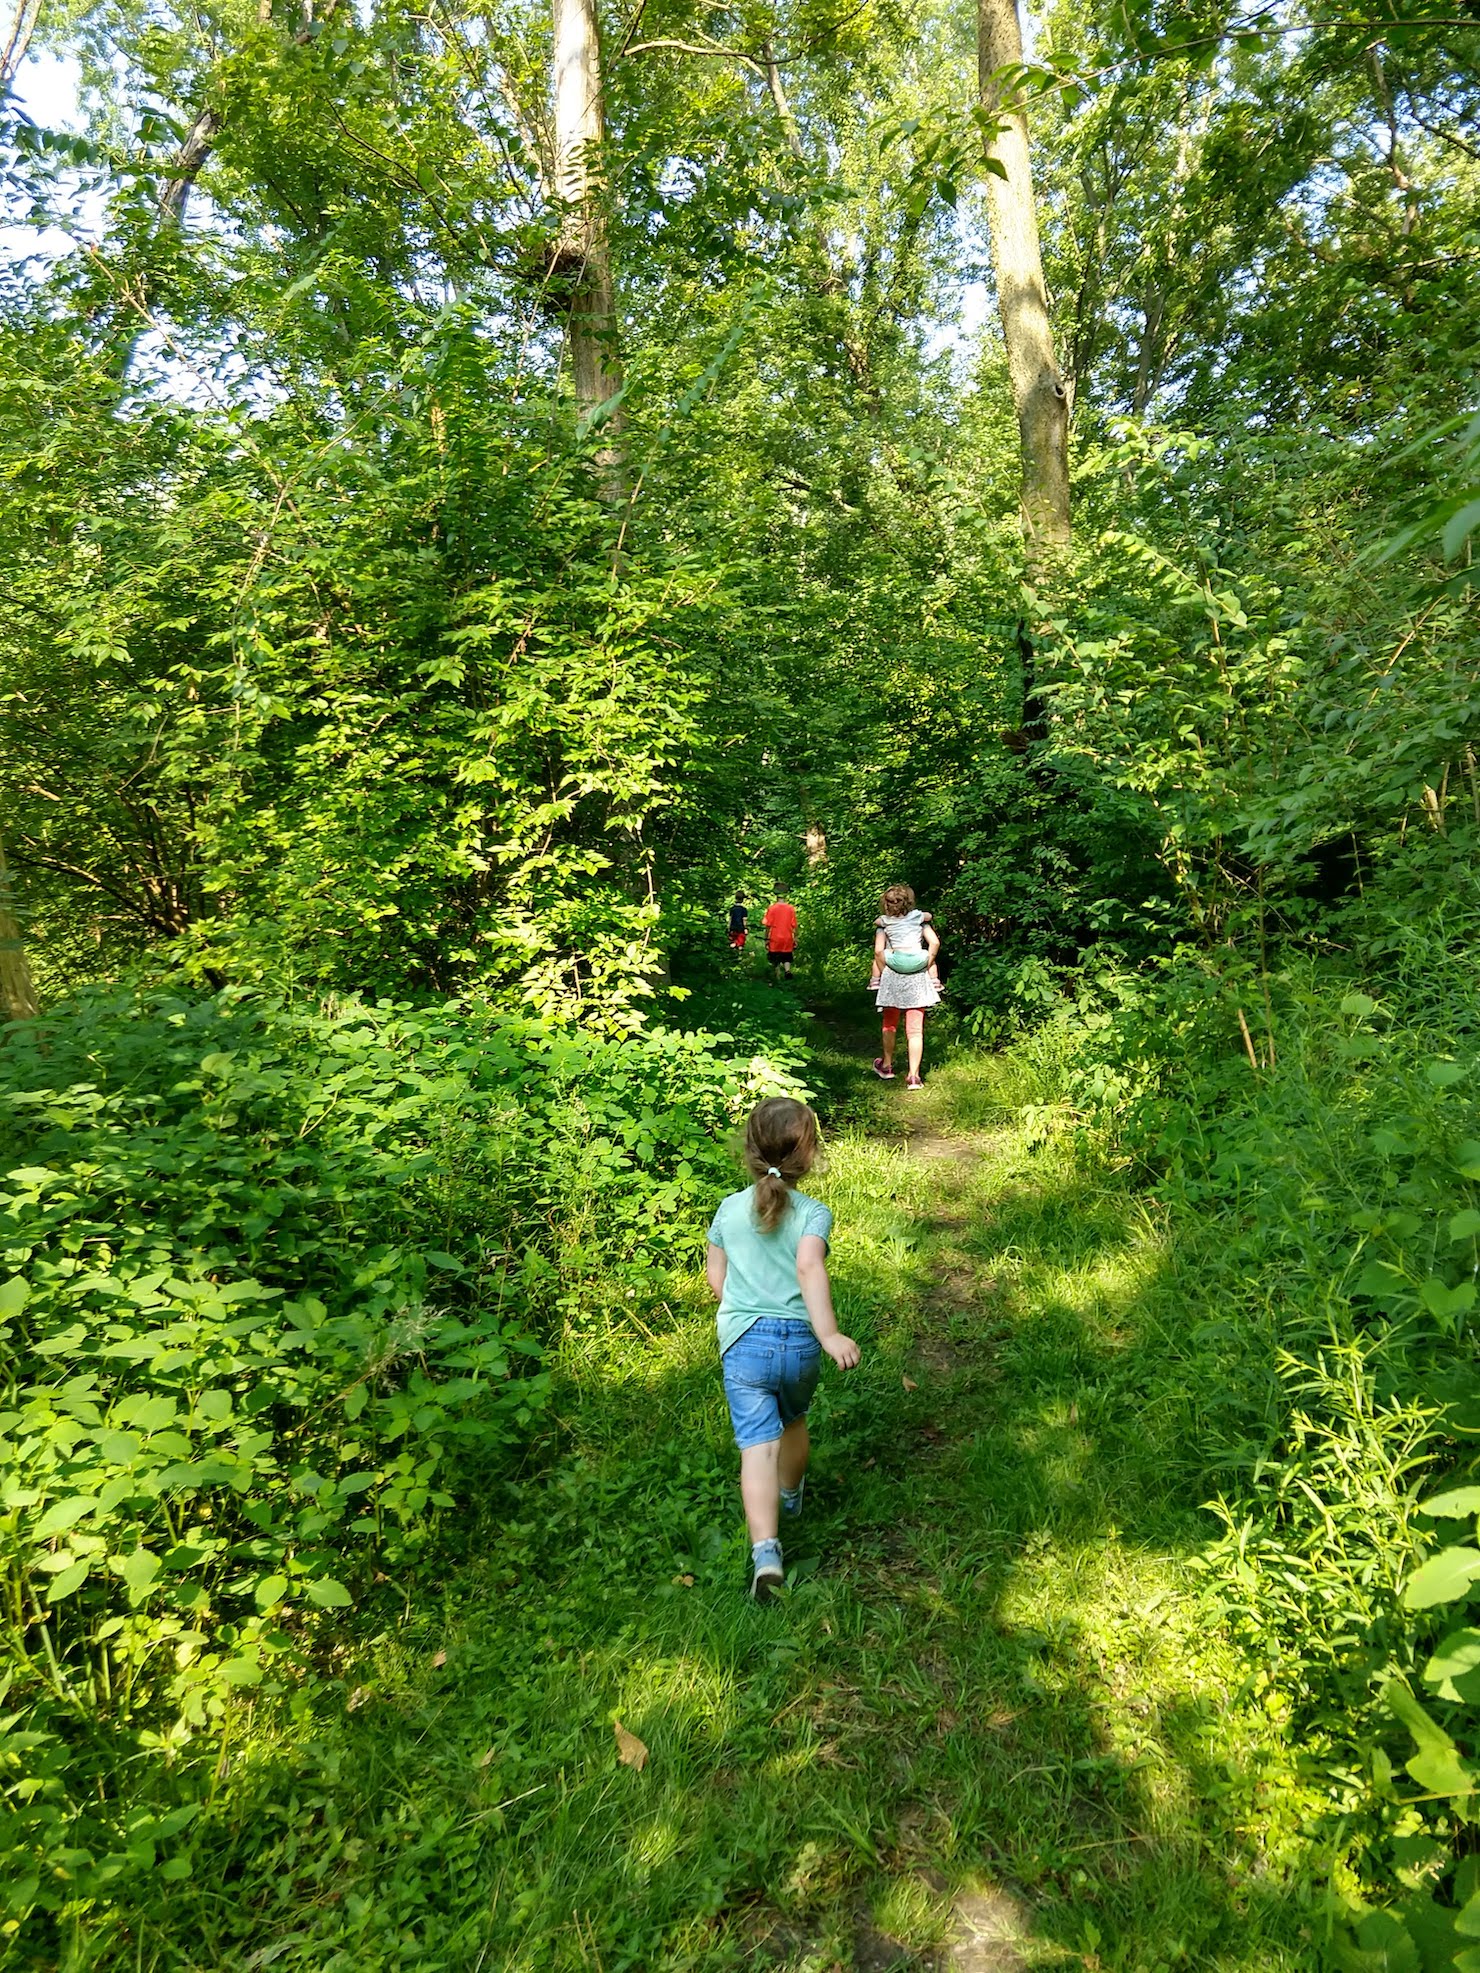 children hiking through a fen, toddler on the girl's back